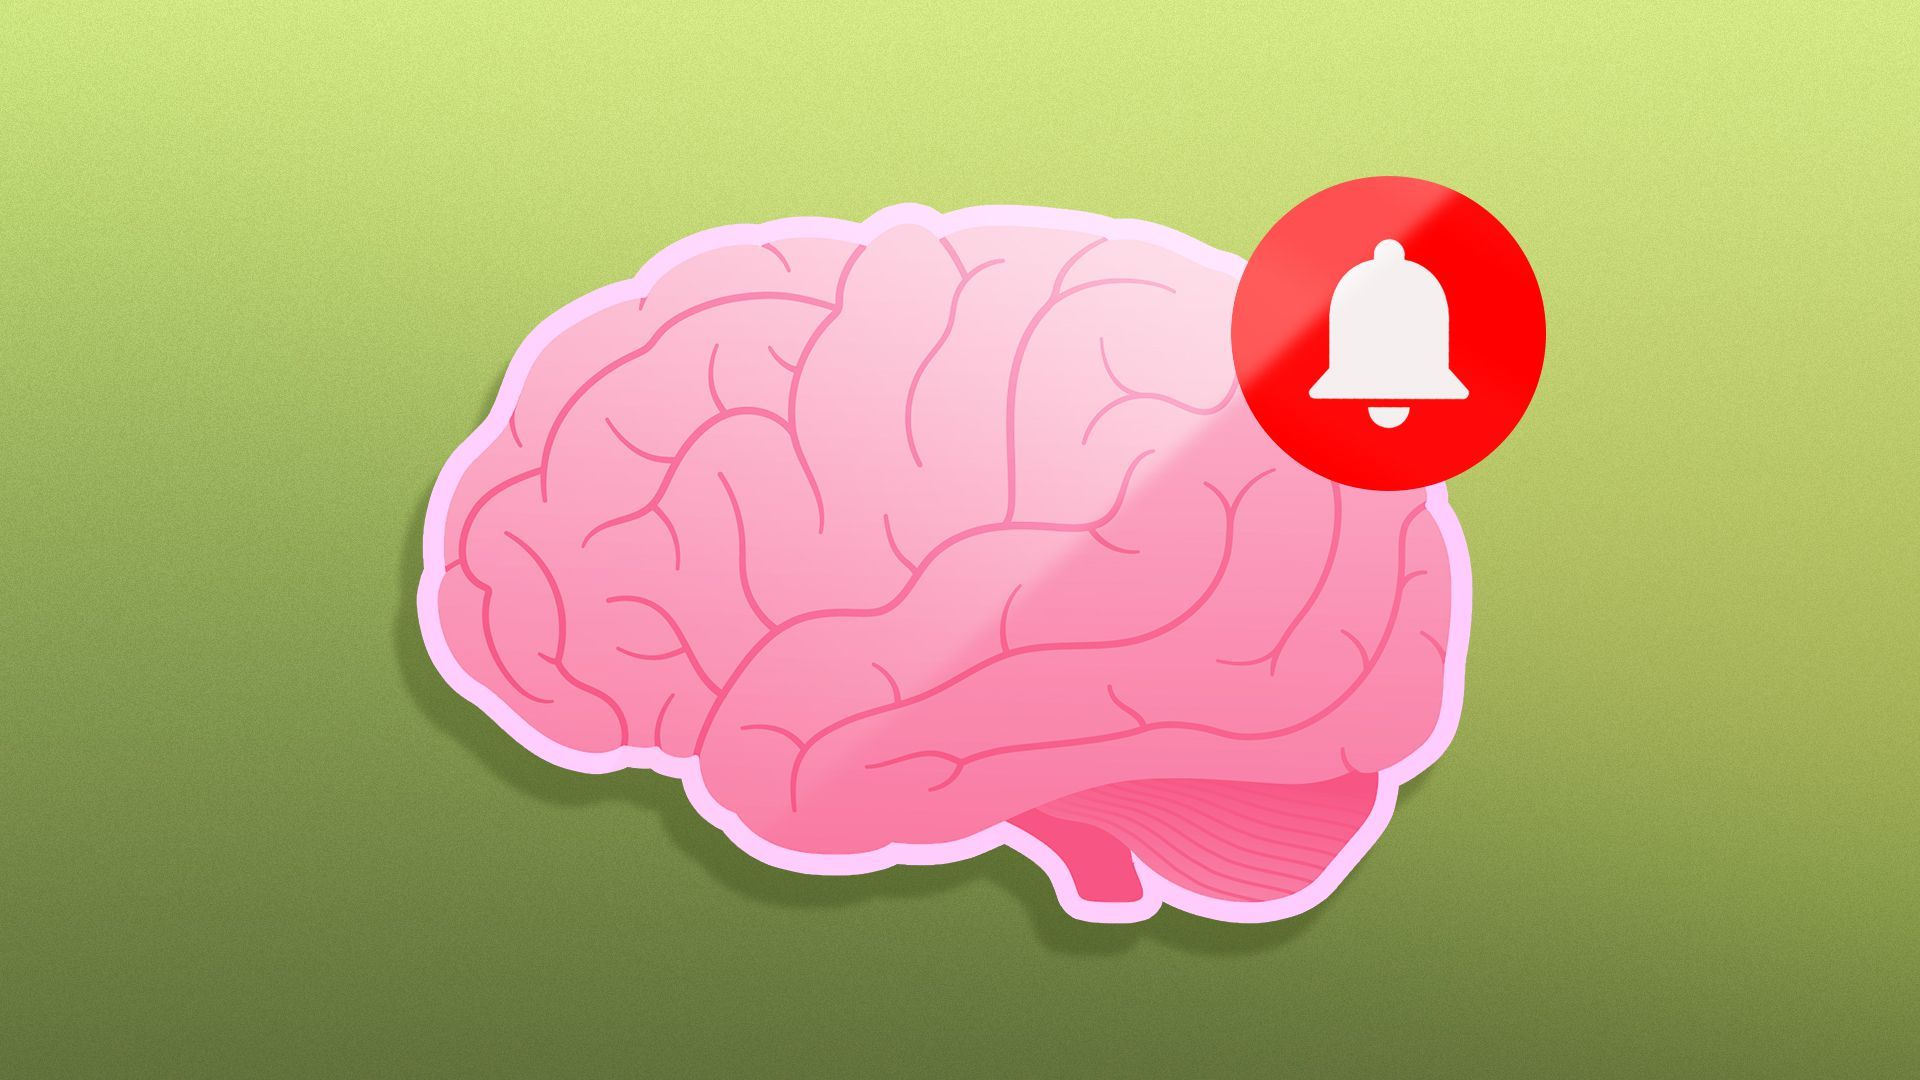 Illustration of an app-like brain with an alarm icon on it